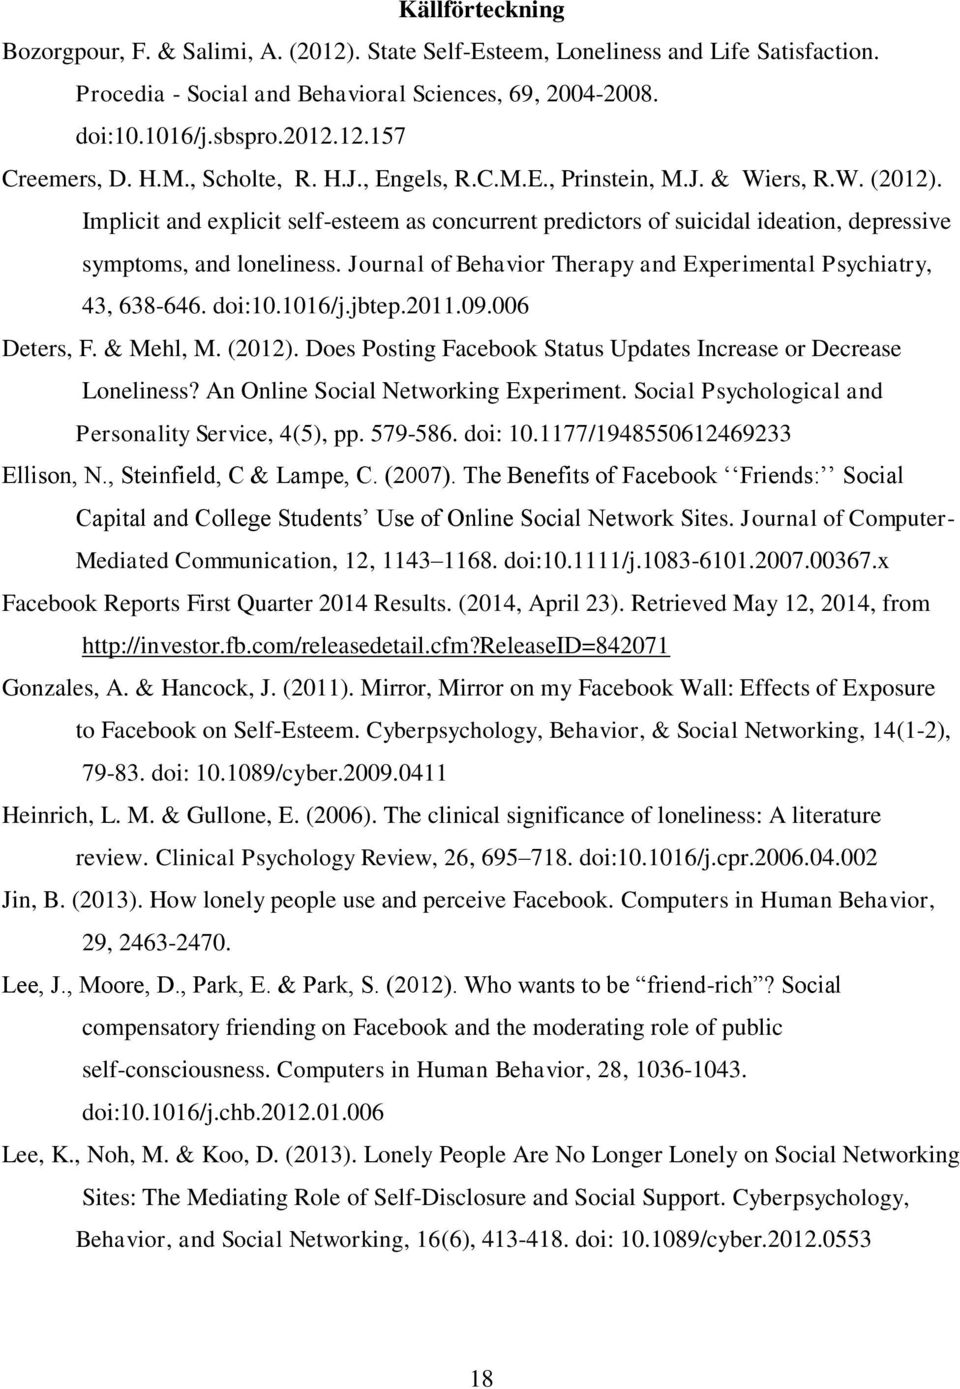 Journal of Behavior Therapy and Experimental Psychiatry, 43, 638-646. doi:10.1016/j.jbtep.2011.09.006 Deters, F. & Mehl, M. (2012).